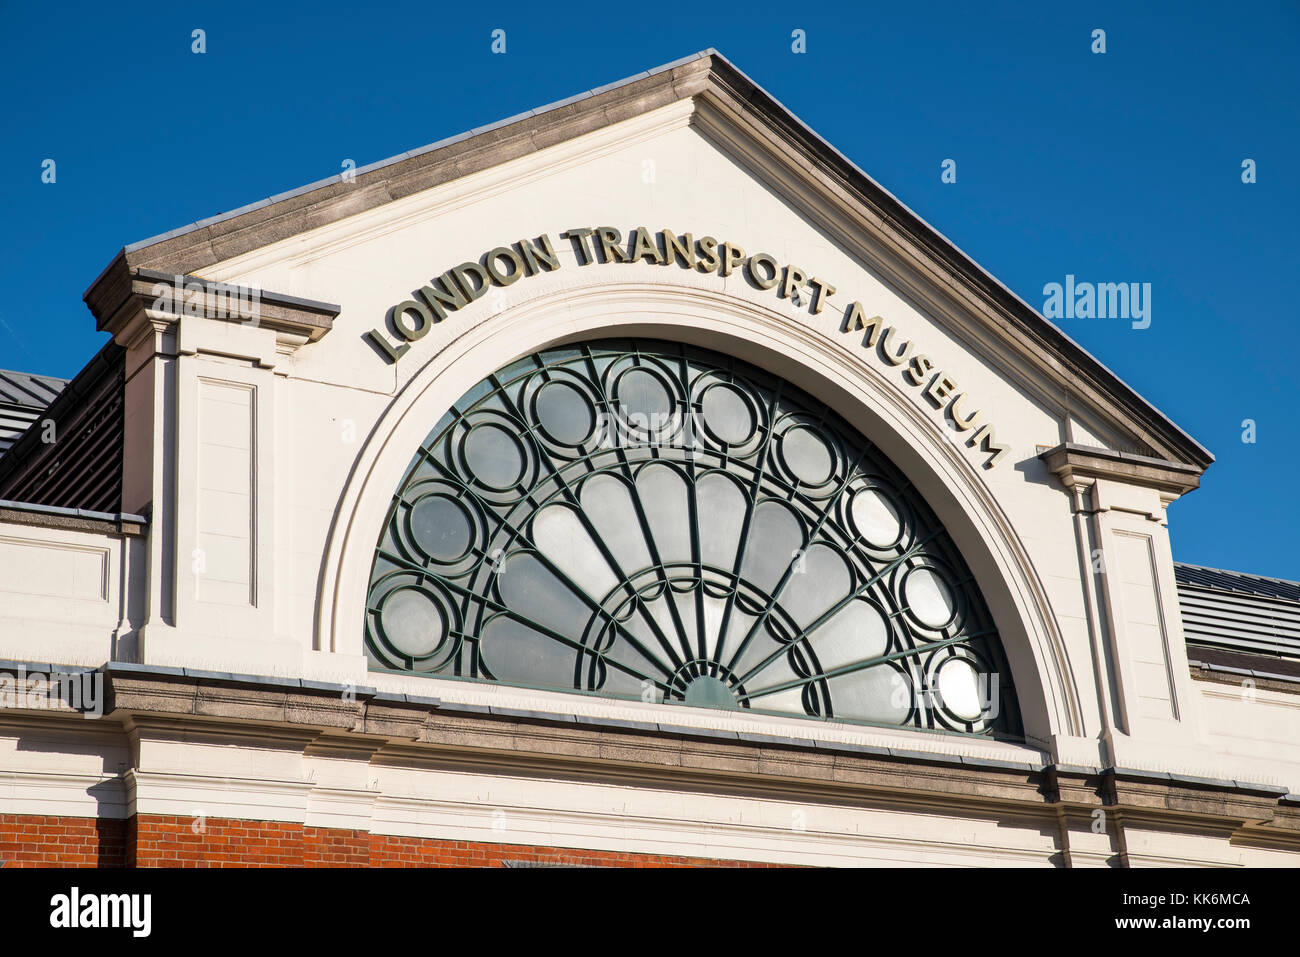 The exterior of the London Transport Museum, located in Covent Garden in London, UK. Stock Photo